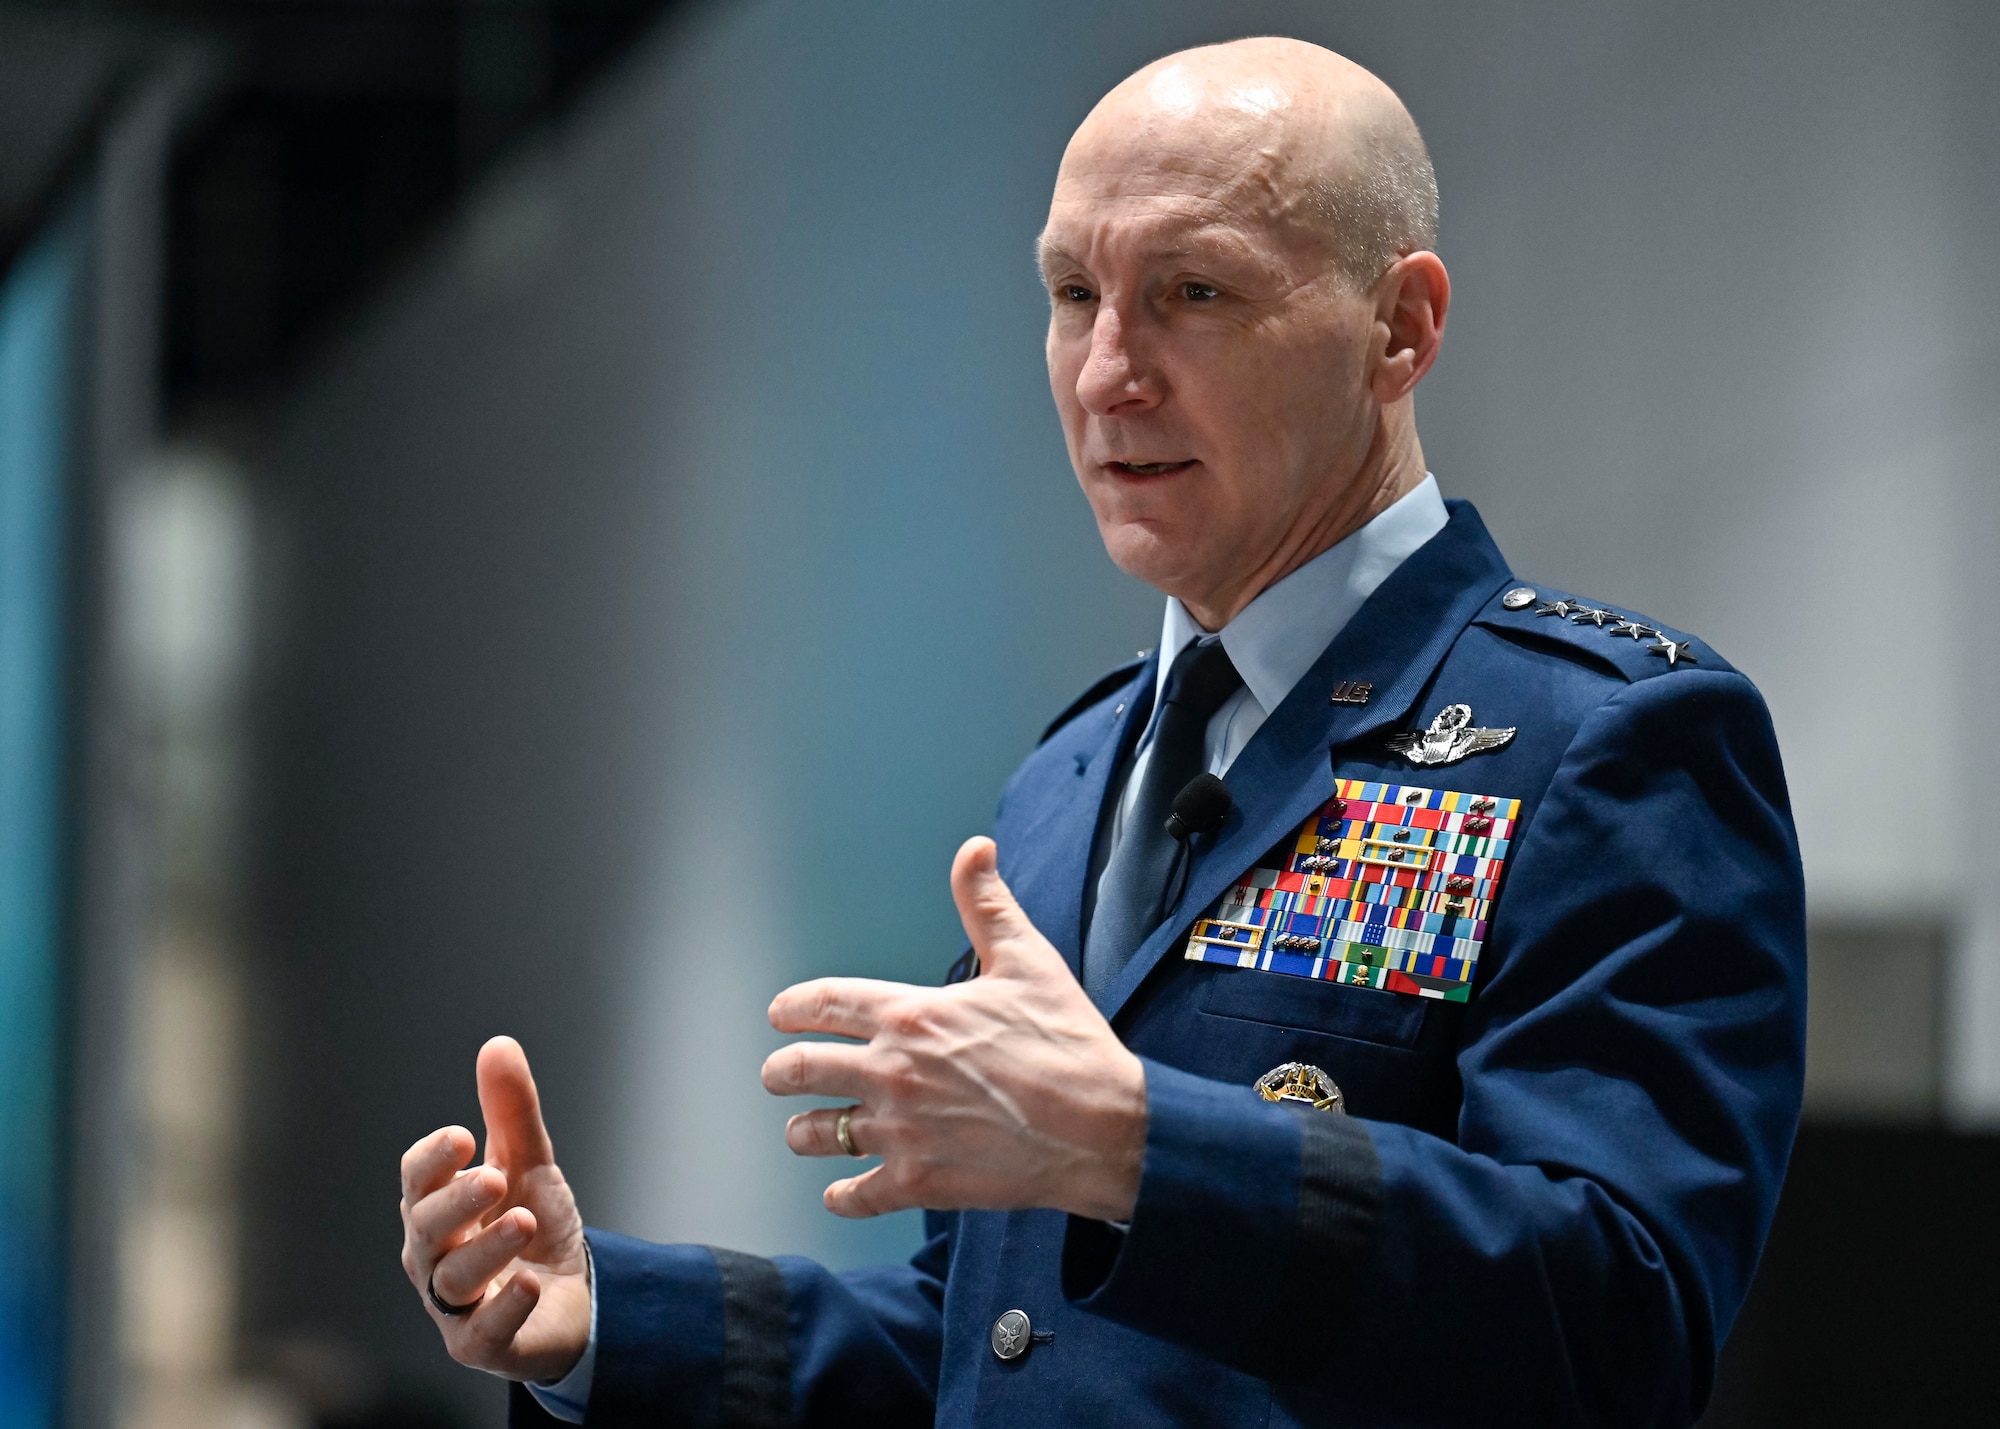 Allvin: Aligning Air Force’s approach is key to reoptimizing for Great Power Competition